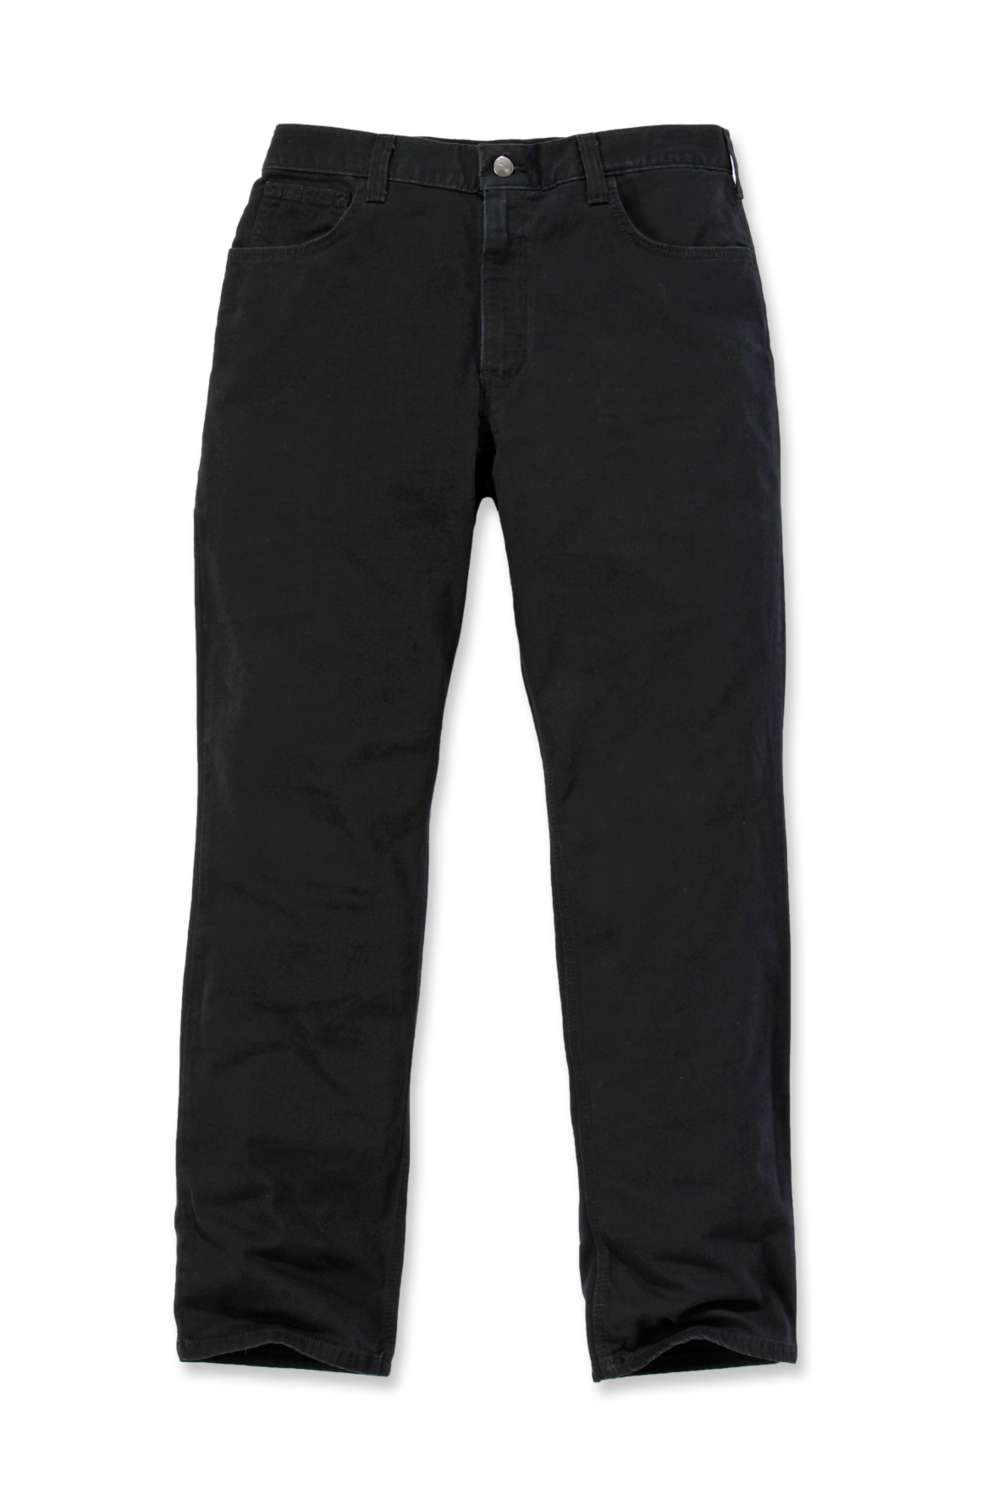 RIGBY Arbeitshose Relaxed Fit 5-Pocket, Stretch